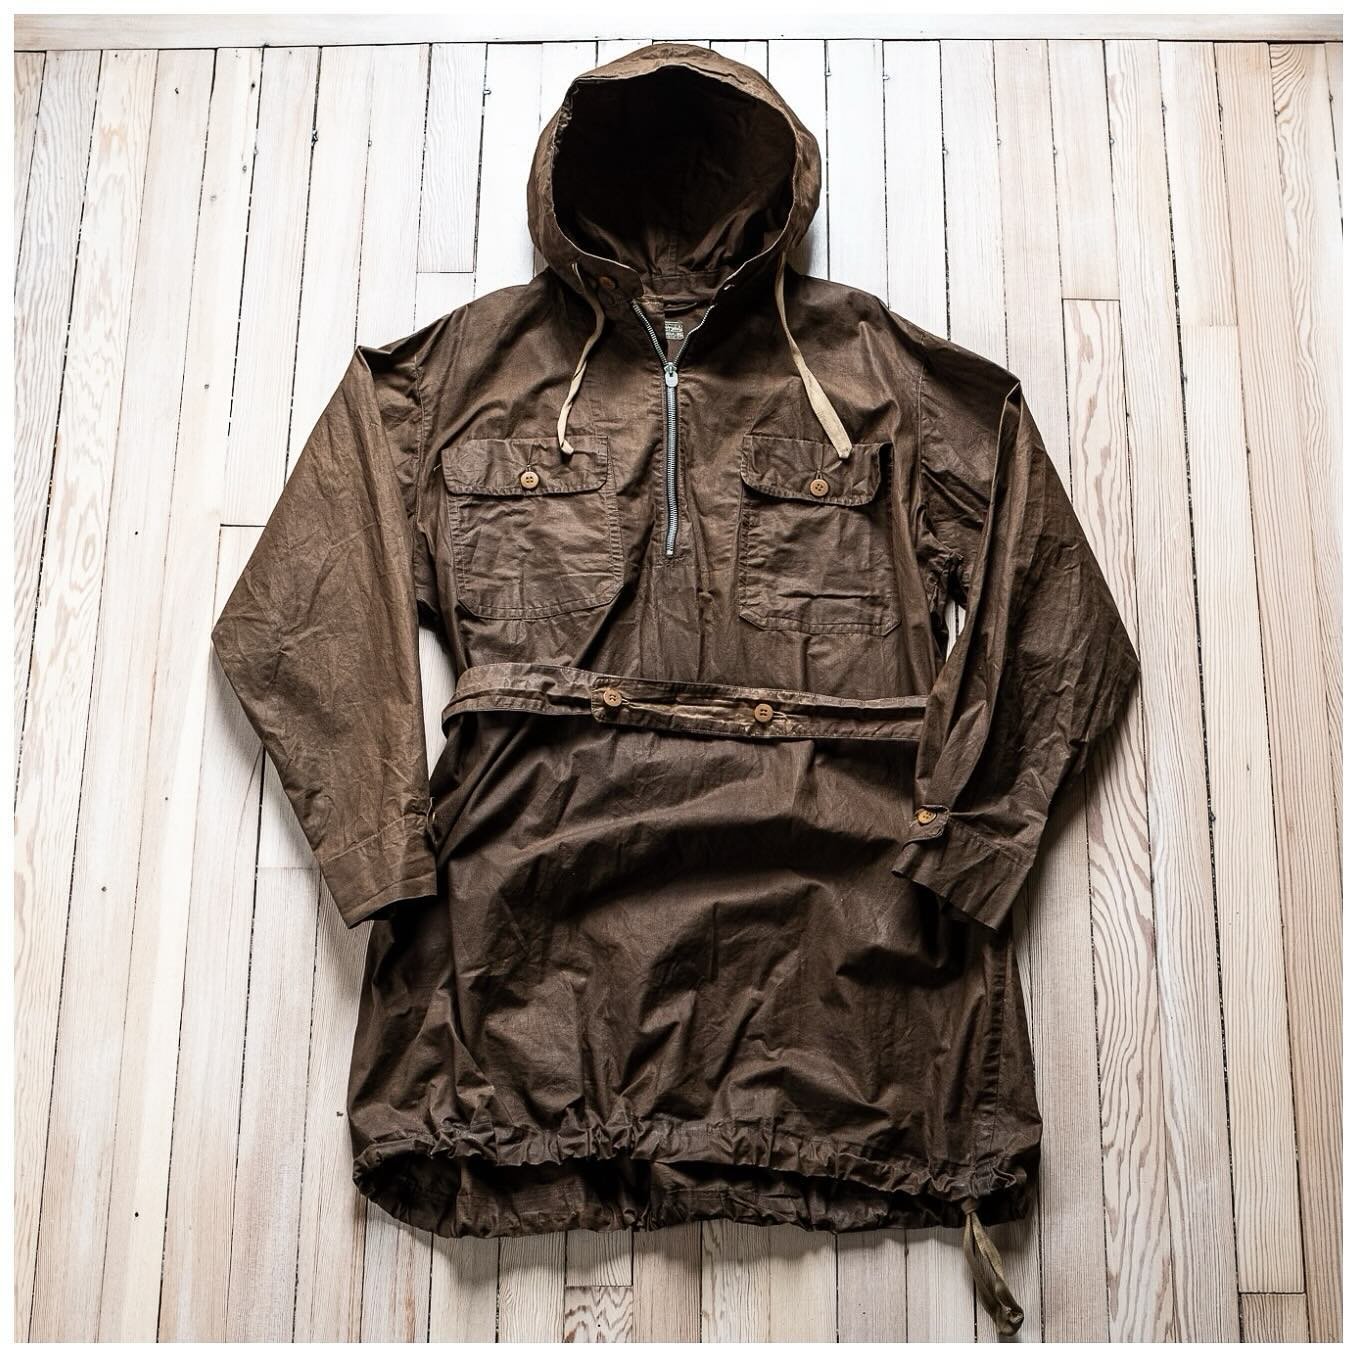 Archive Piece (Not For Sale). Here is a relic! It&rsquo;s been a while since we have shared an archive piece so figured we would show off a good one that we acquired a few years ago. 

This is a 1920&rsquo;s Windproof Mountaineering Smock by Abercrom